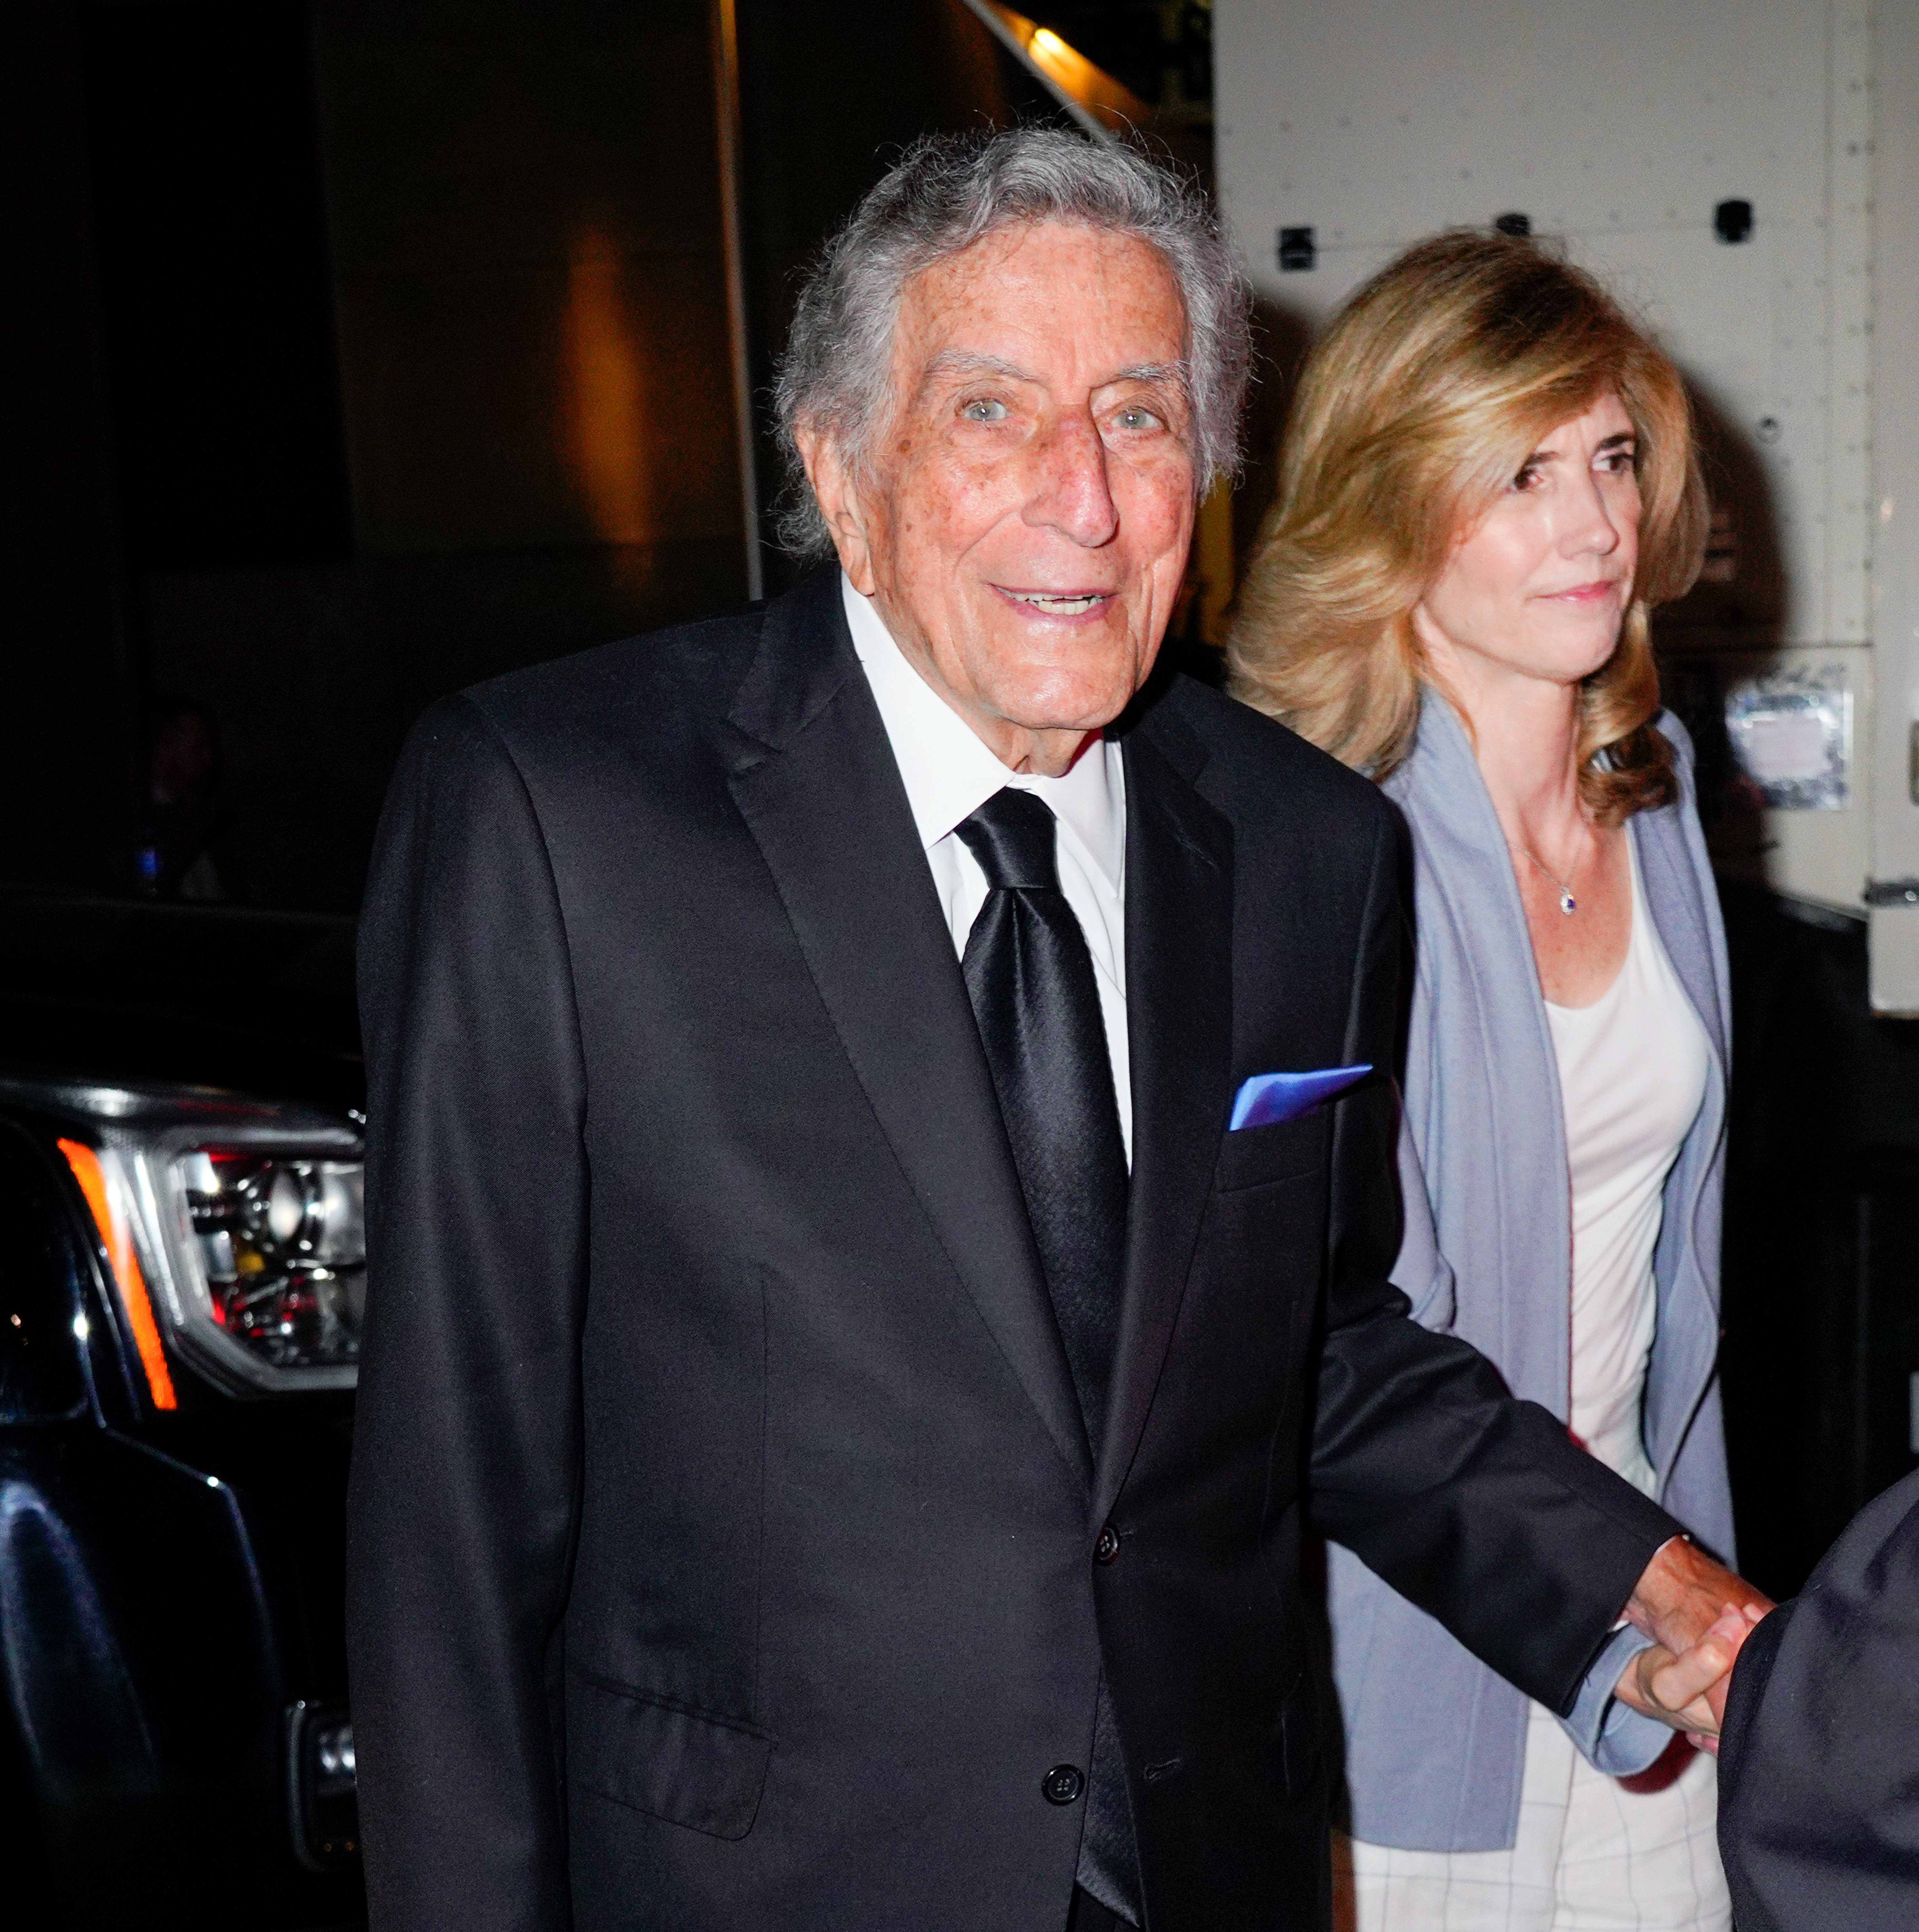 Tony Bennett and Susan Crow depart Radio City Music Hall on the last day of his performances with Lady Gaga on August 05, 2021 in New York City. | Source: Getty Images